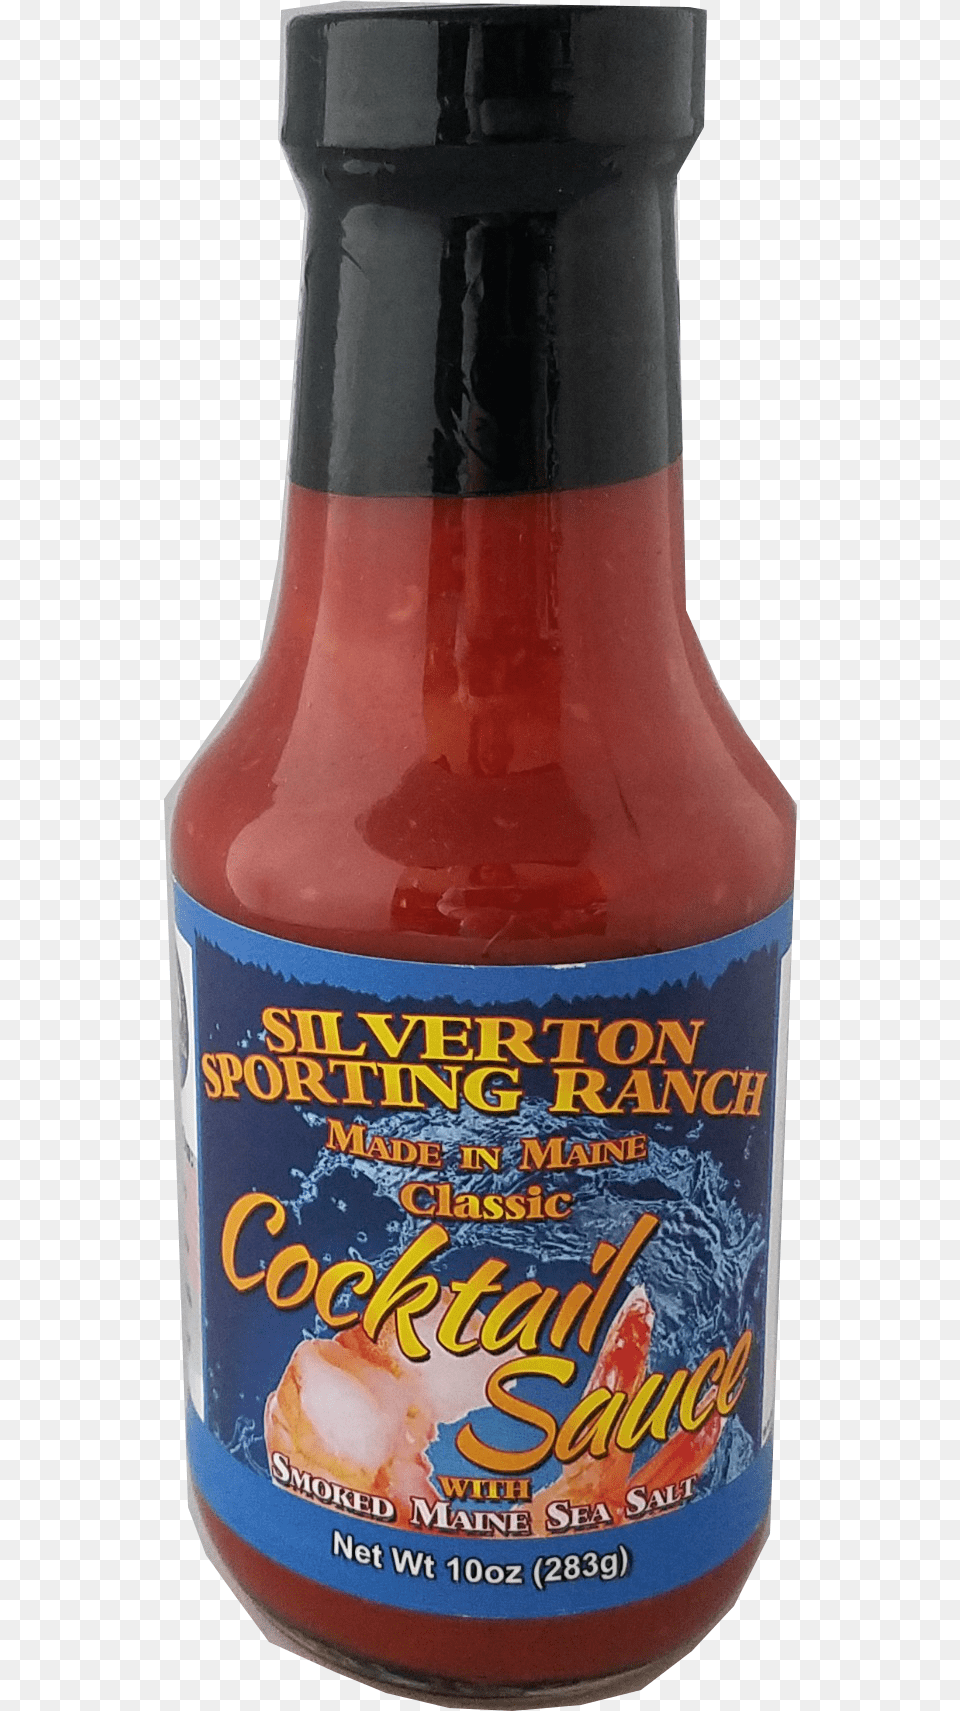 Classic Cocktail Sauce With Smoked Maine Sea Salt Bottle, Food, Ketchup, Alcohol, Beer Free Png